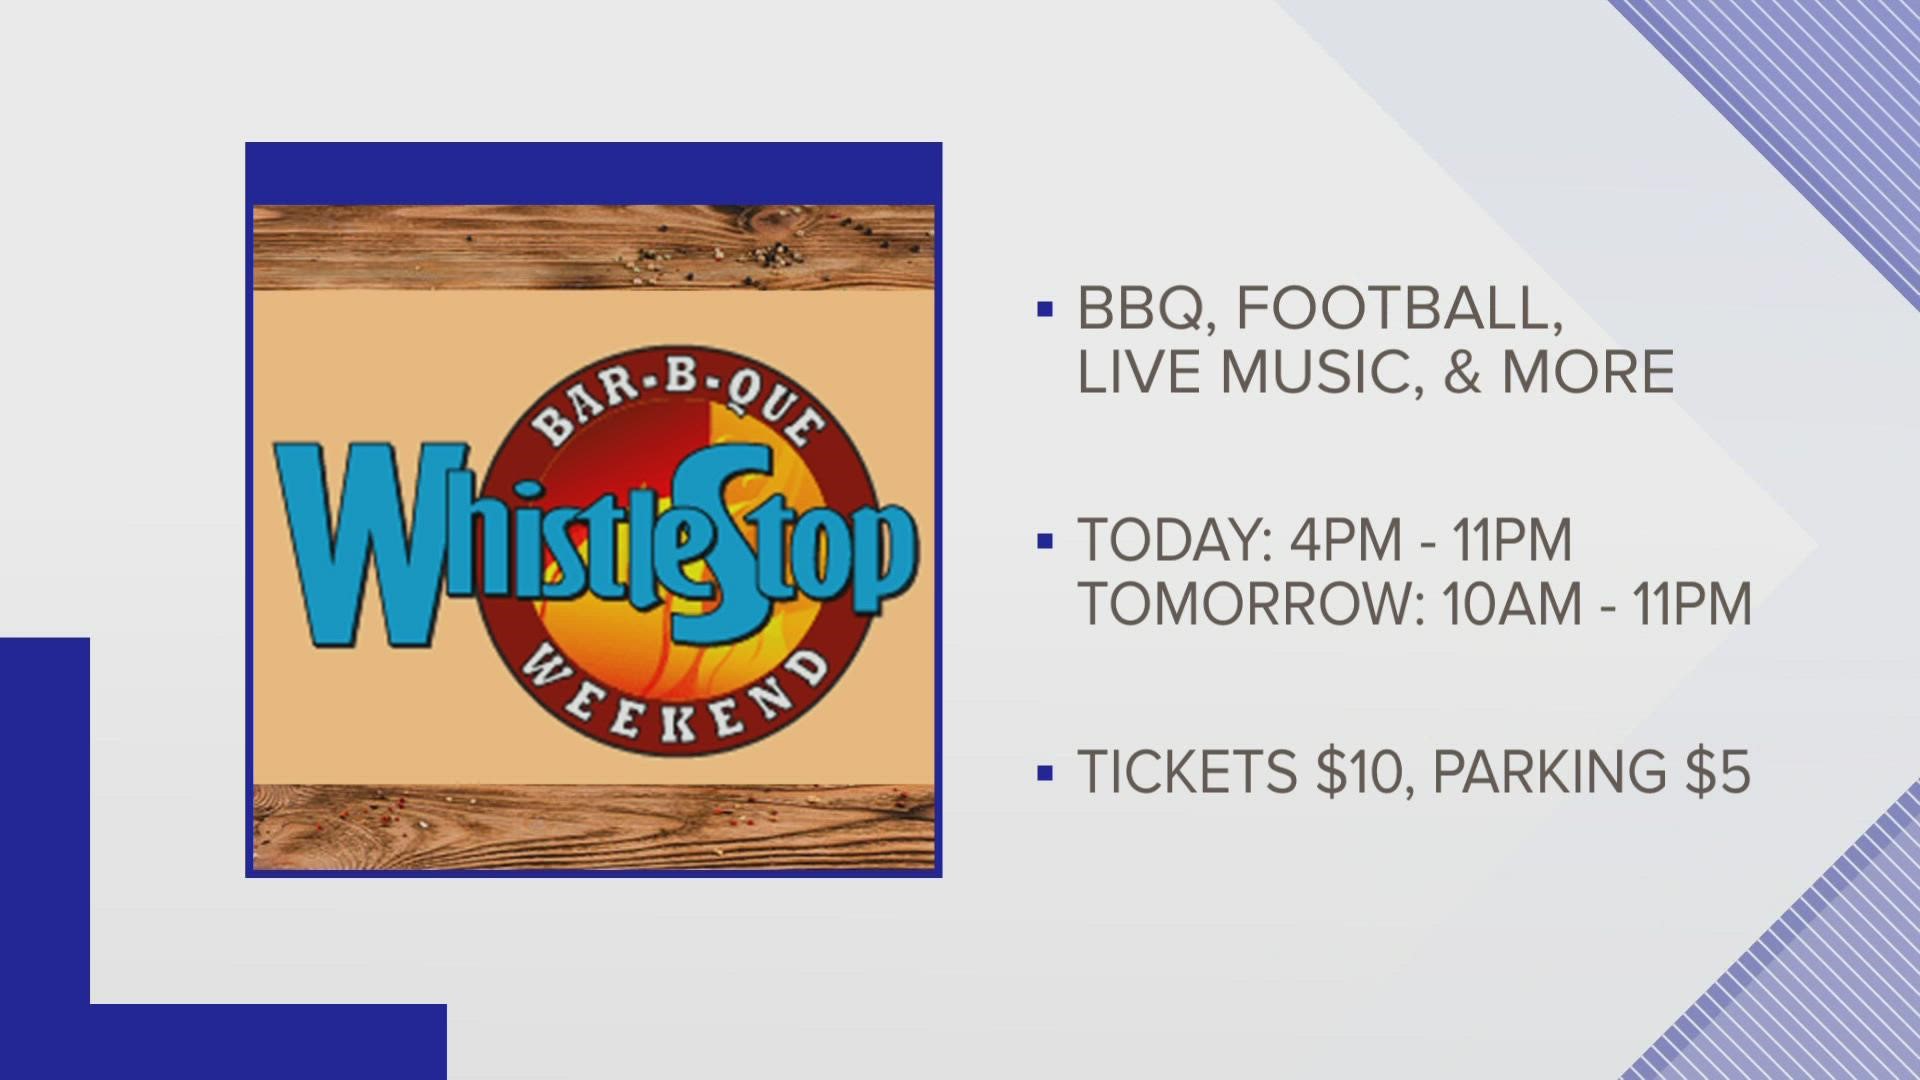 WhistleStop Weekend bringing bbq, cars, and football Sept. 9-10